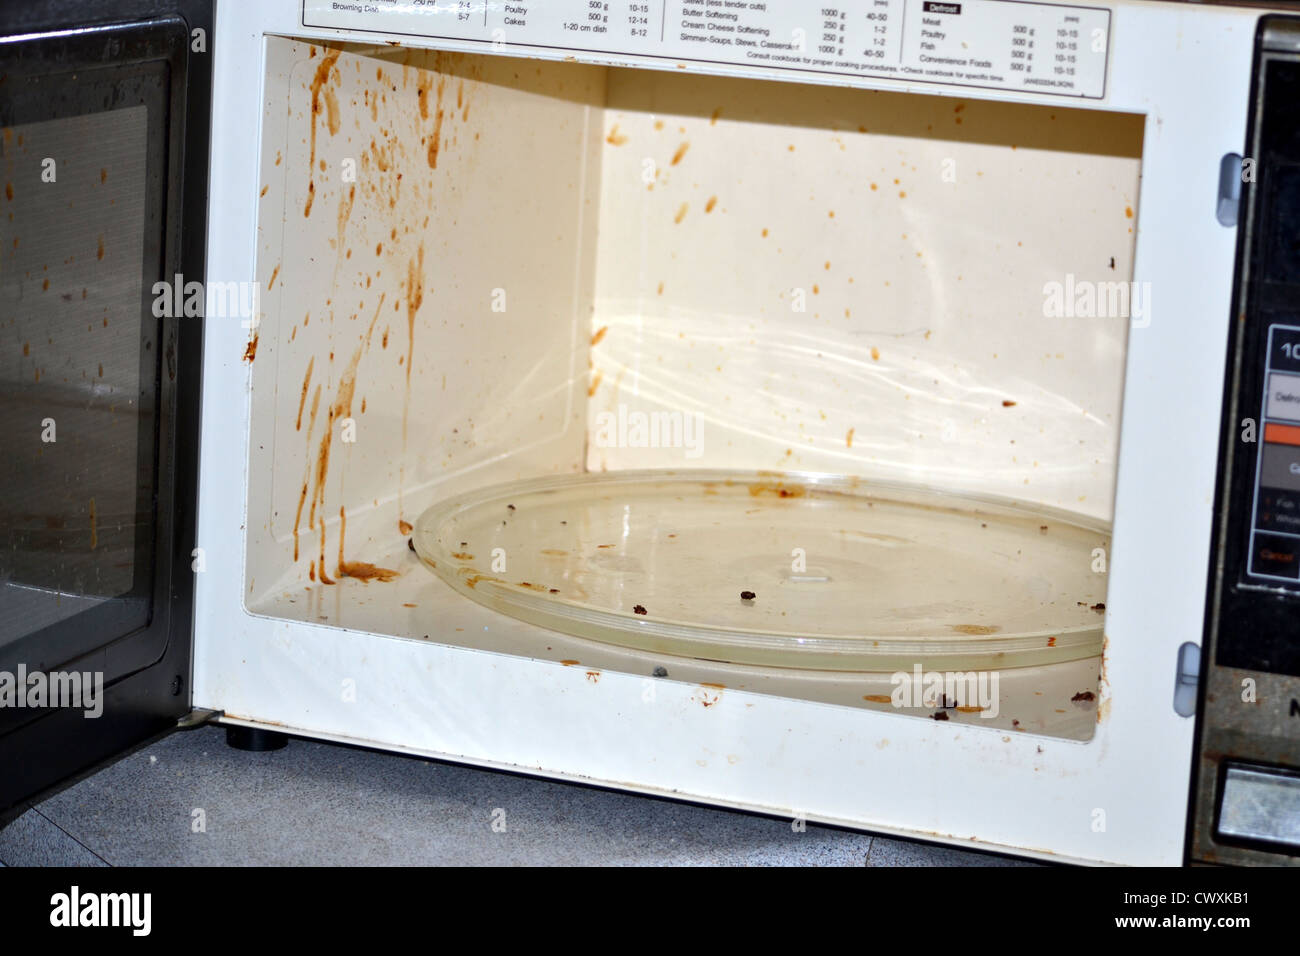 Dirty old microwave Stock Photo